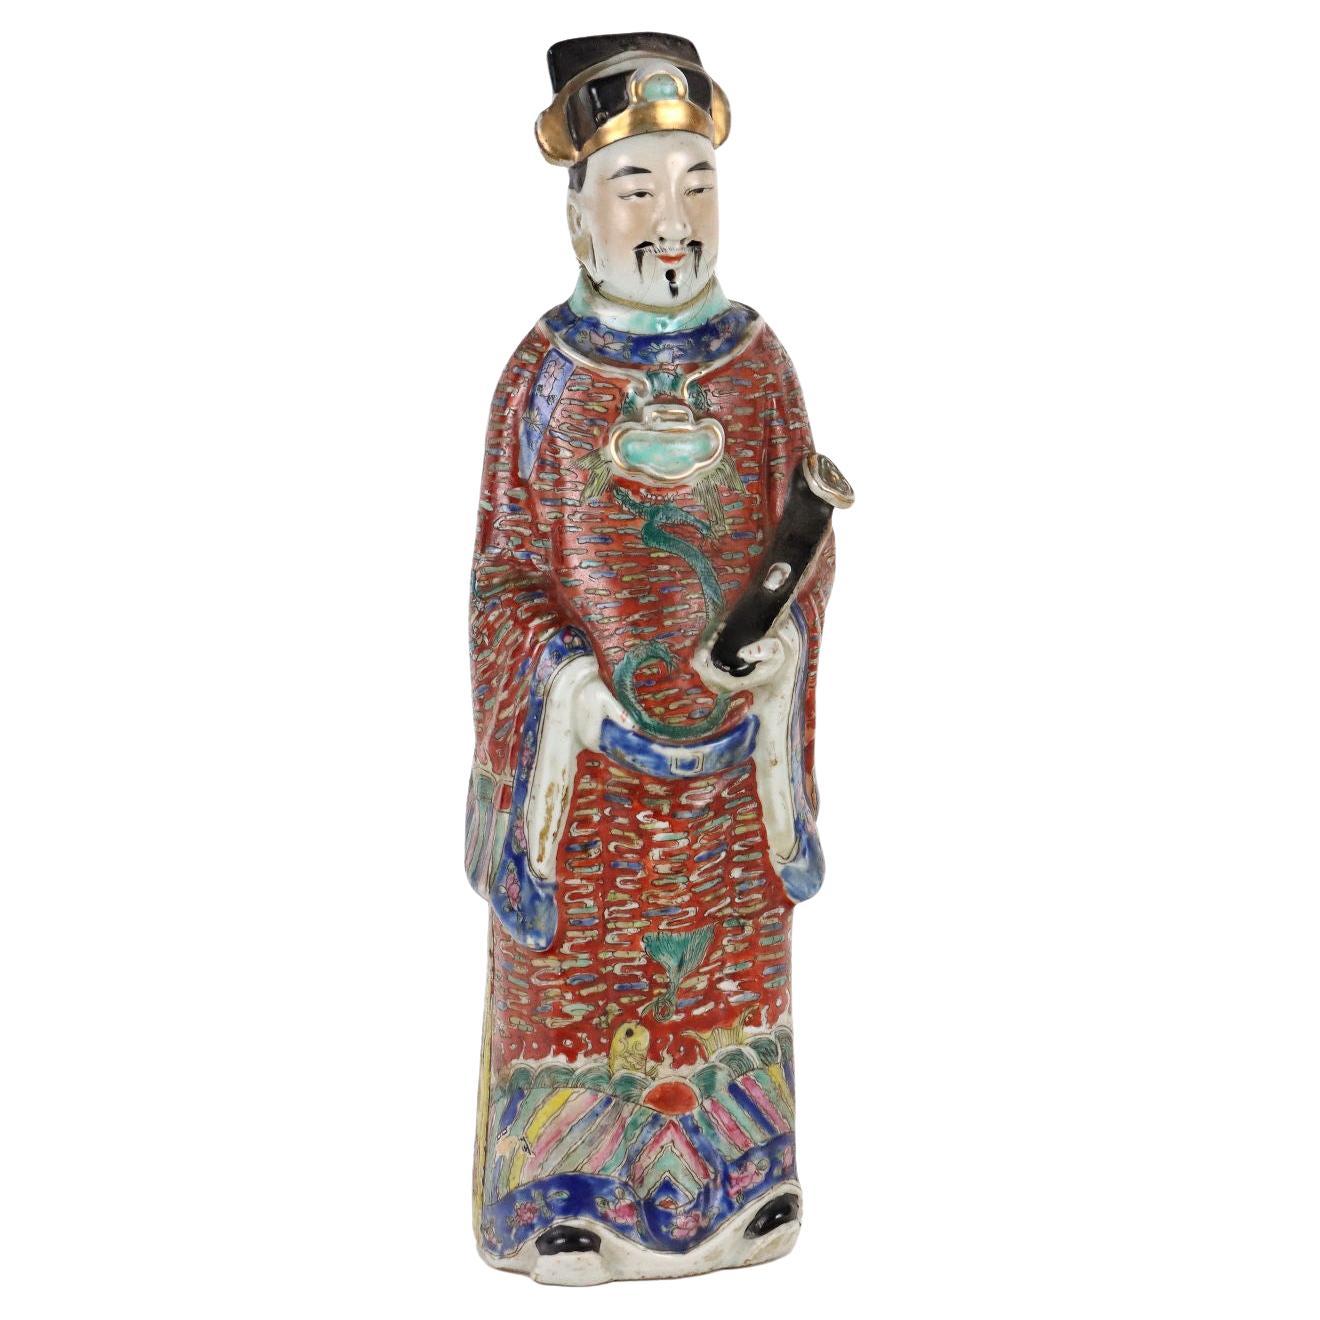 Lu Xing Porcelain Figur China XX Century, China Period of the Republic 1925-1935 For Sale